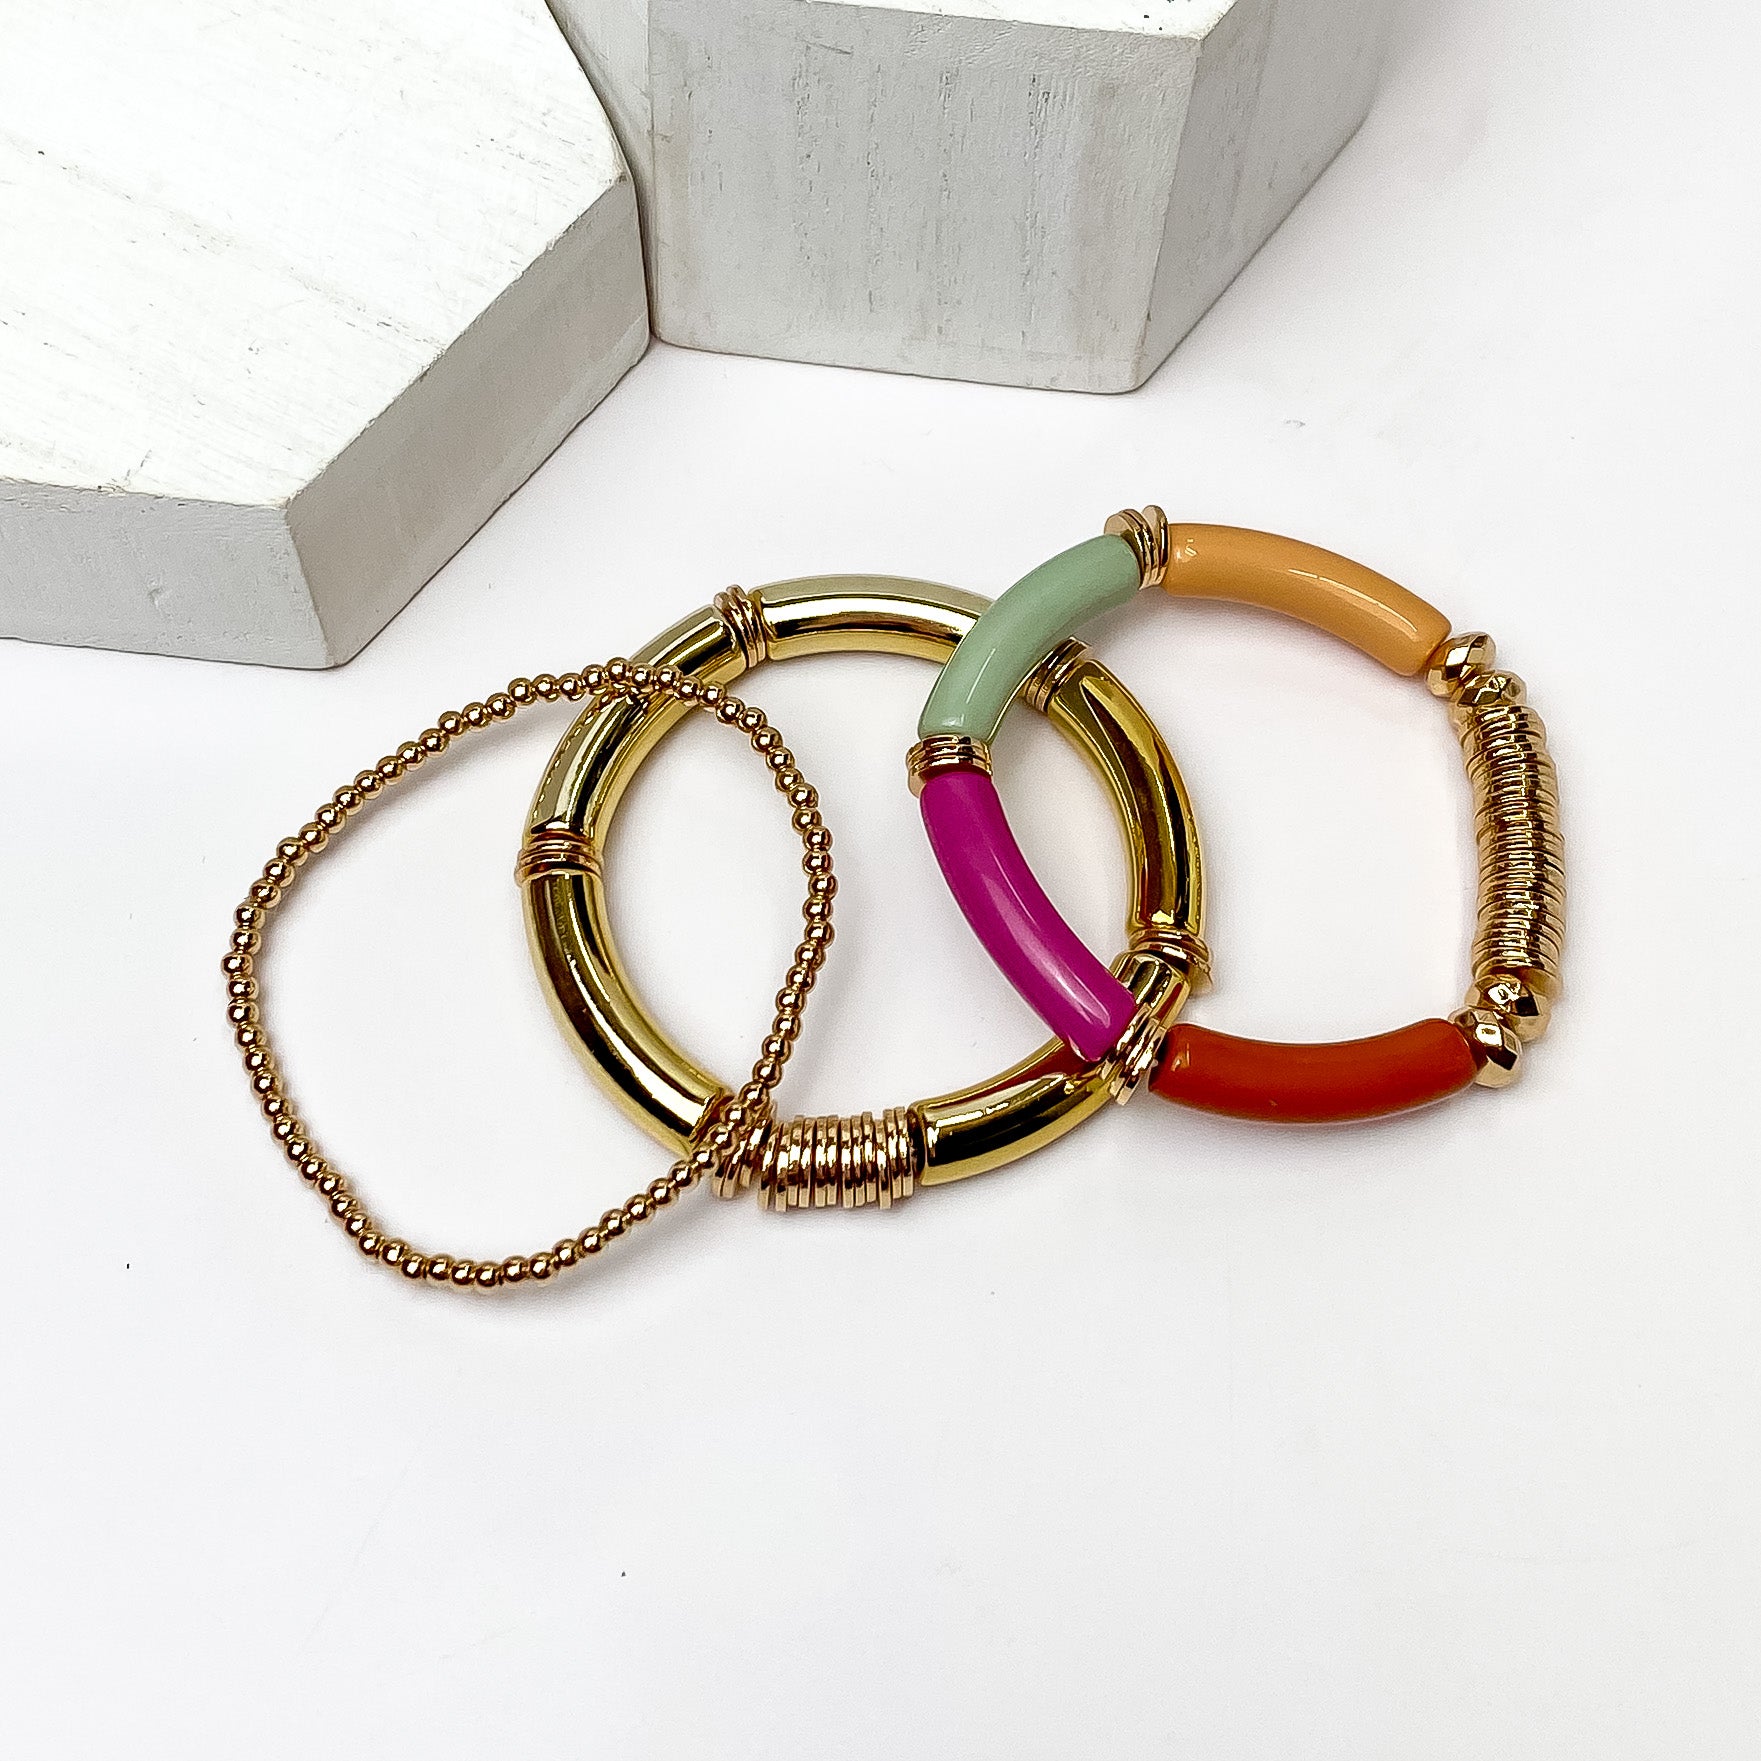 Set of Three | Bahama Nights Gold Tone Tube Bracelet Set in Multicolor. Pictured on a white background with white platforms above the bracelets. 